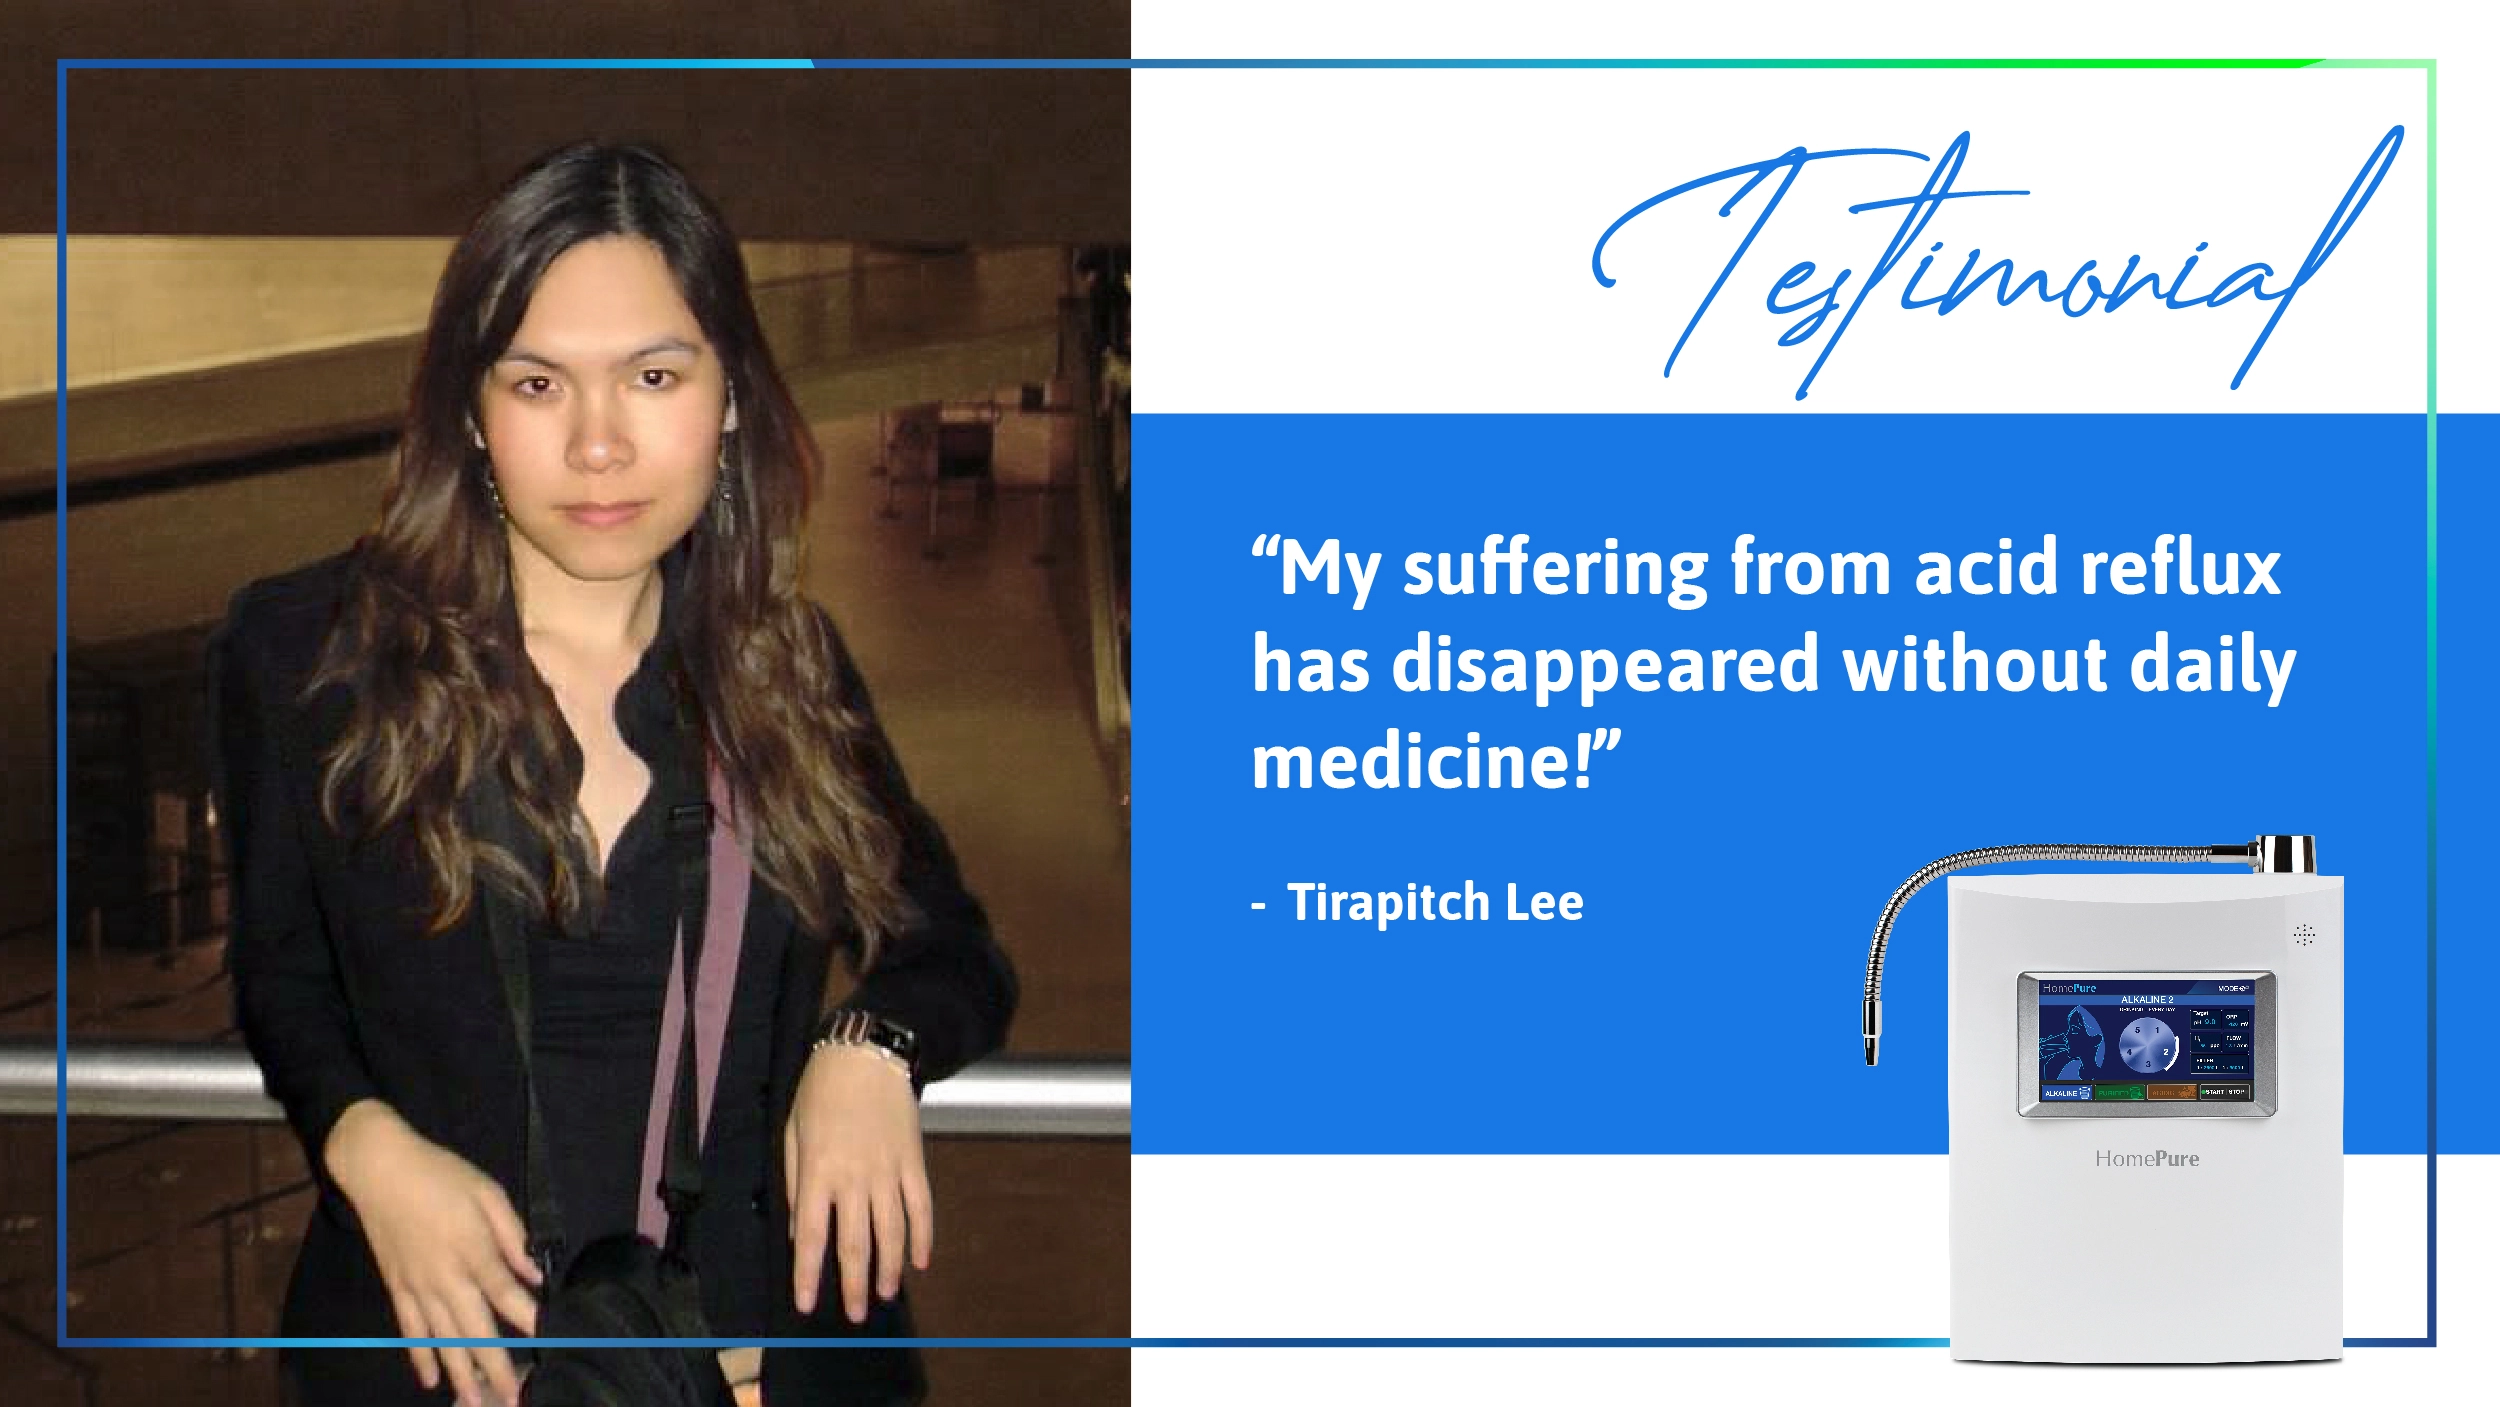 HomePure Viva testimonial from Tirapitch Lee: My suffering from acid reflux has disappeared without daily medicine!